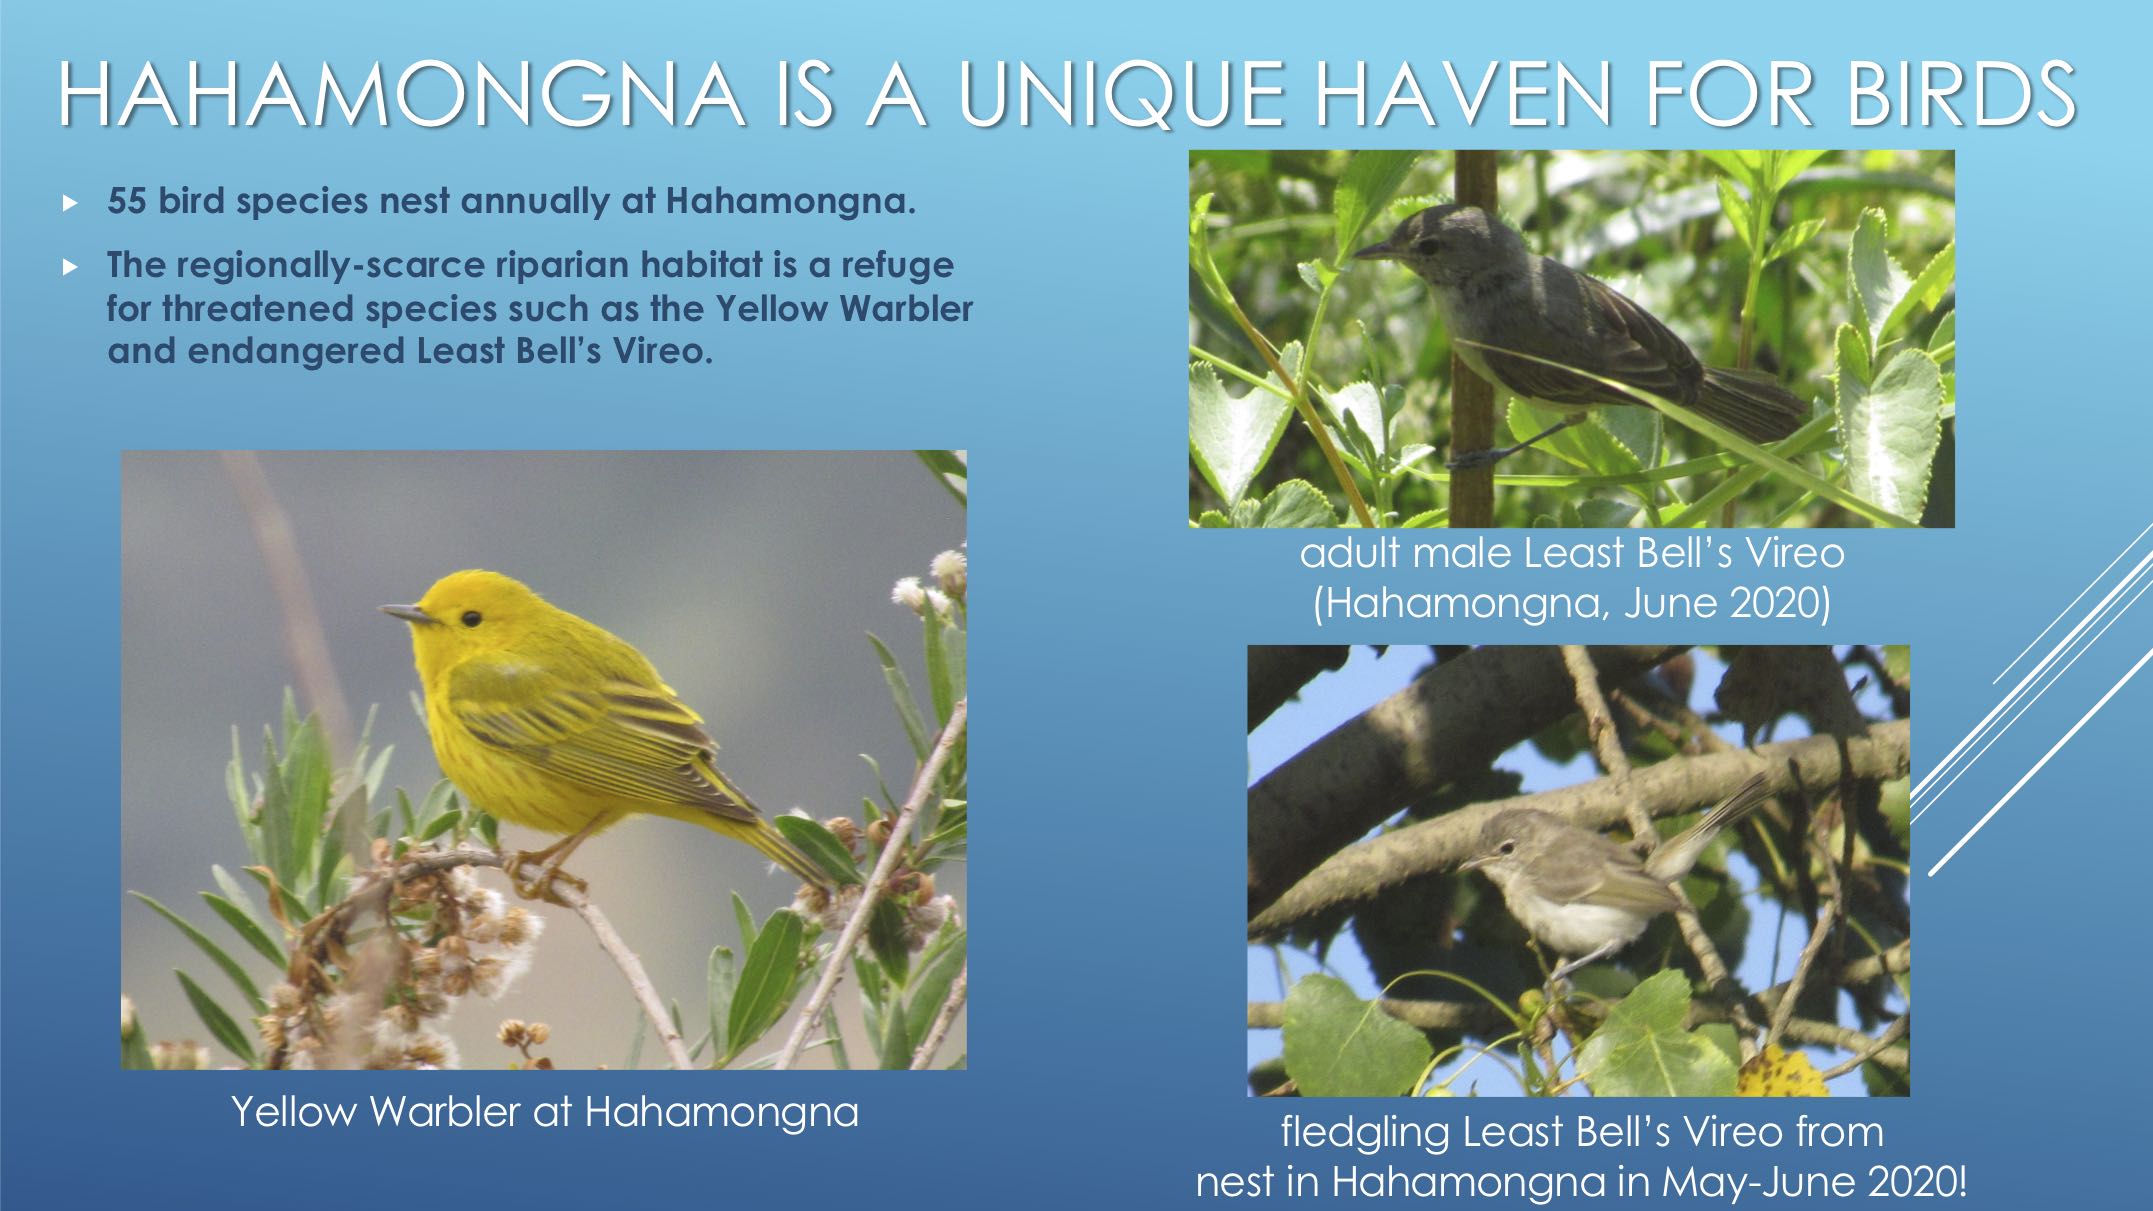 hahamonga is a unique haven for birds